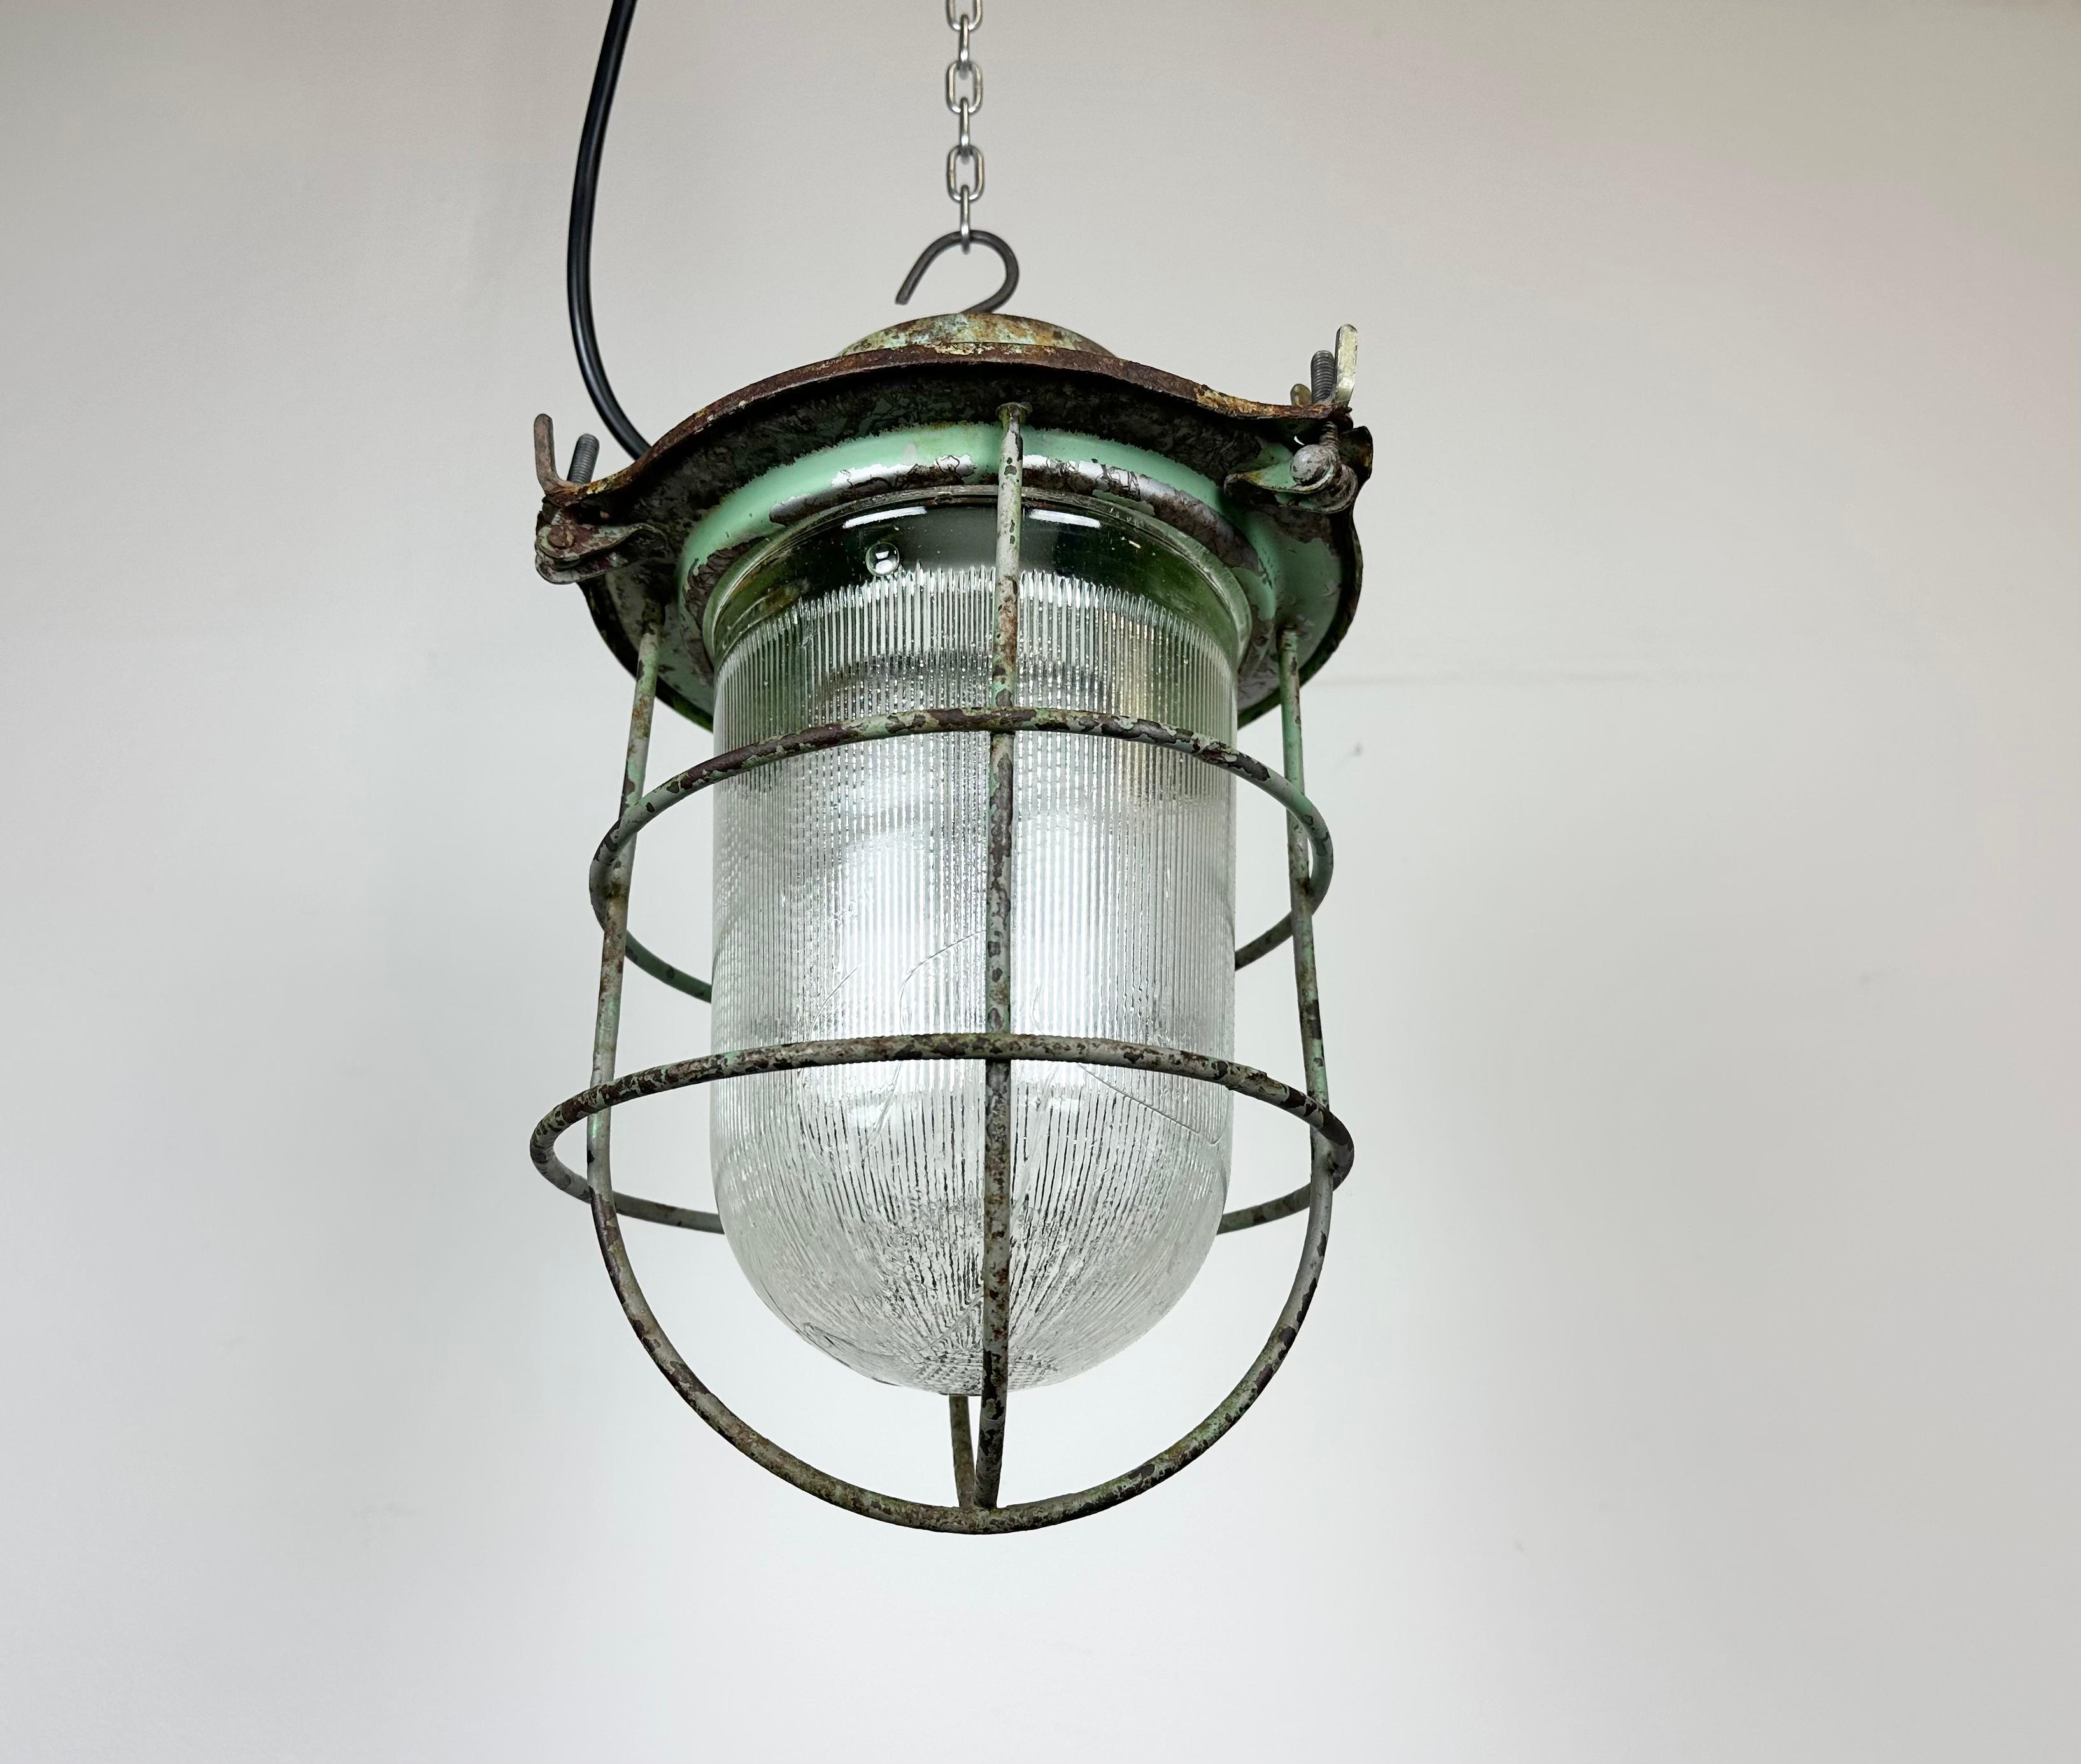 Green Industrial Soviet Bunker Pendant Light with Iron Grid, 1960s For Sale 6